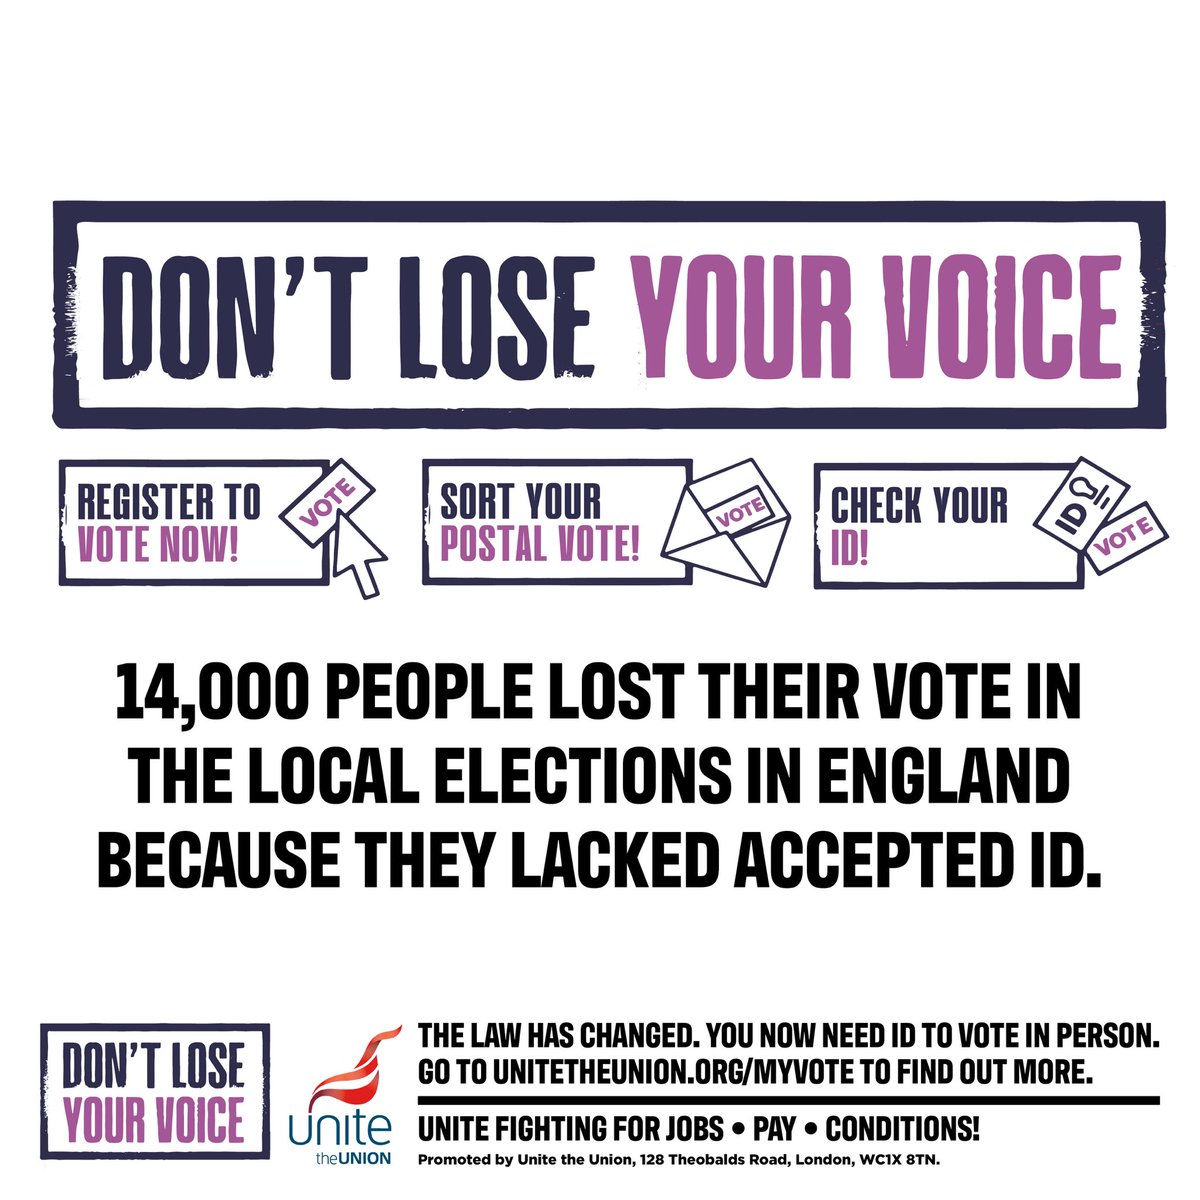 🗳️Elections are taking place across England and Wales on 2 May. Are you ready? ❗️You now need ID to vote at a polling station. 📲 Remember to register to vote first! #DontLoseYourVoice 👉 Find everything you need to get vote ready at unitetheunion.org/myvote